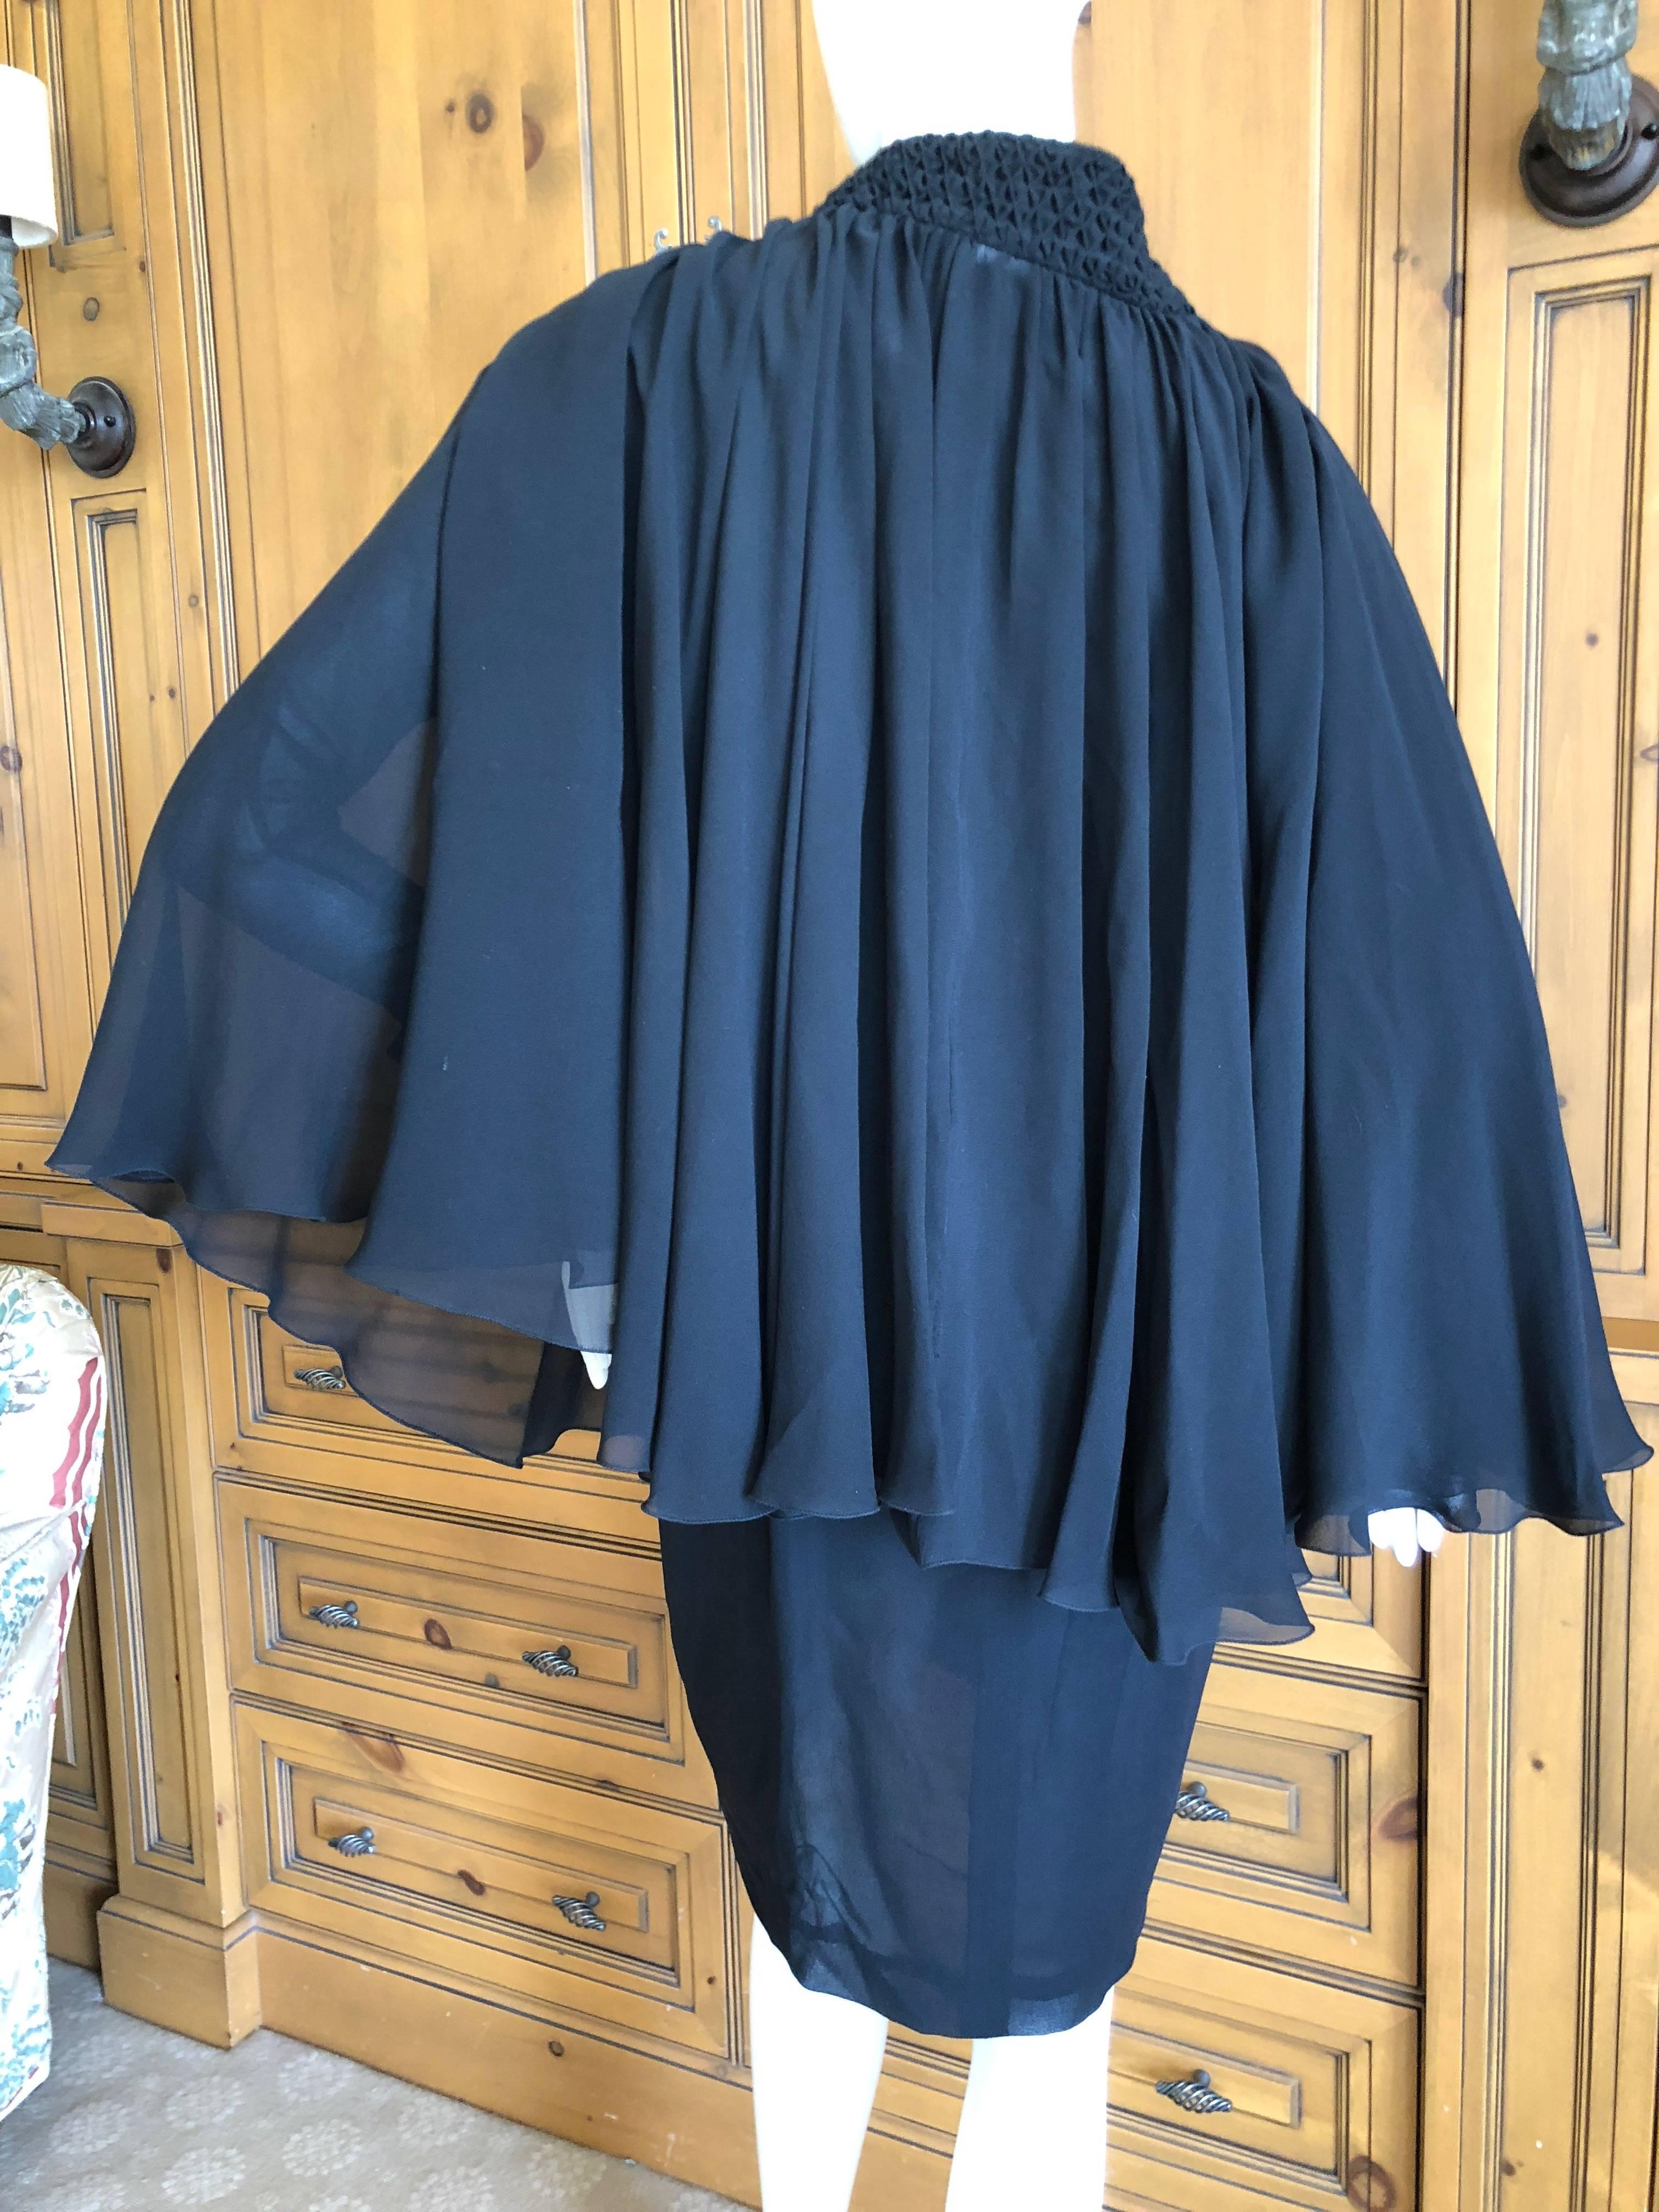 Christian Lacroix Vintage Sheer Black Silk Cocktail Dress with Matching Cape For Sale 5